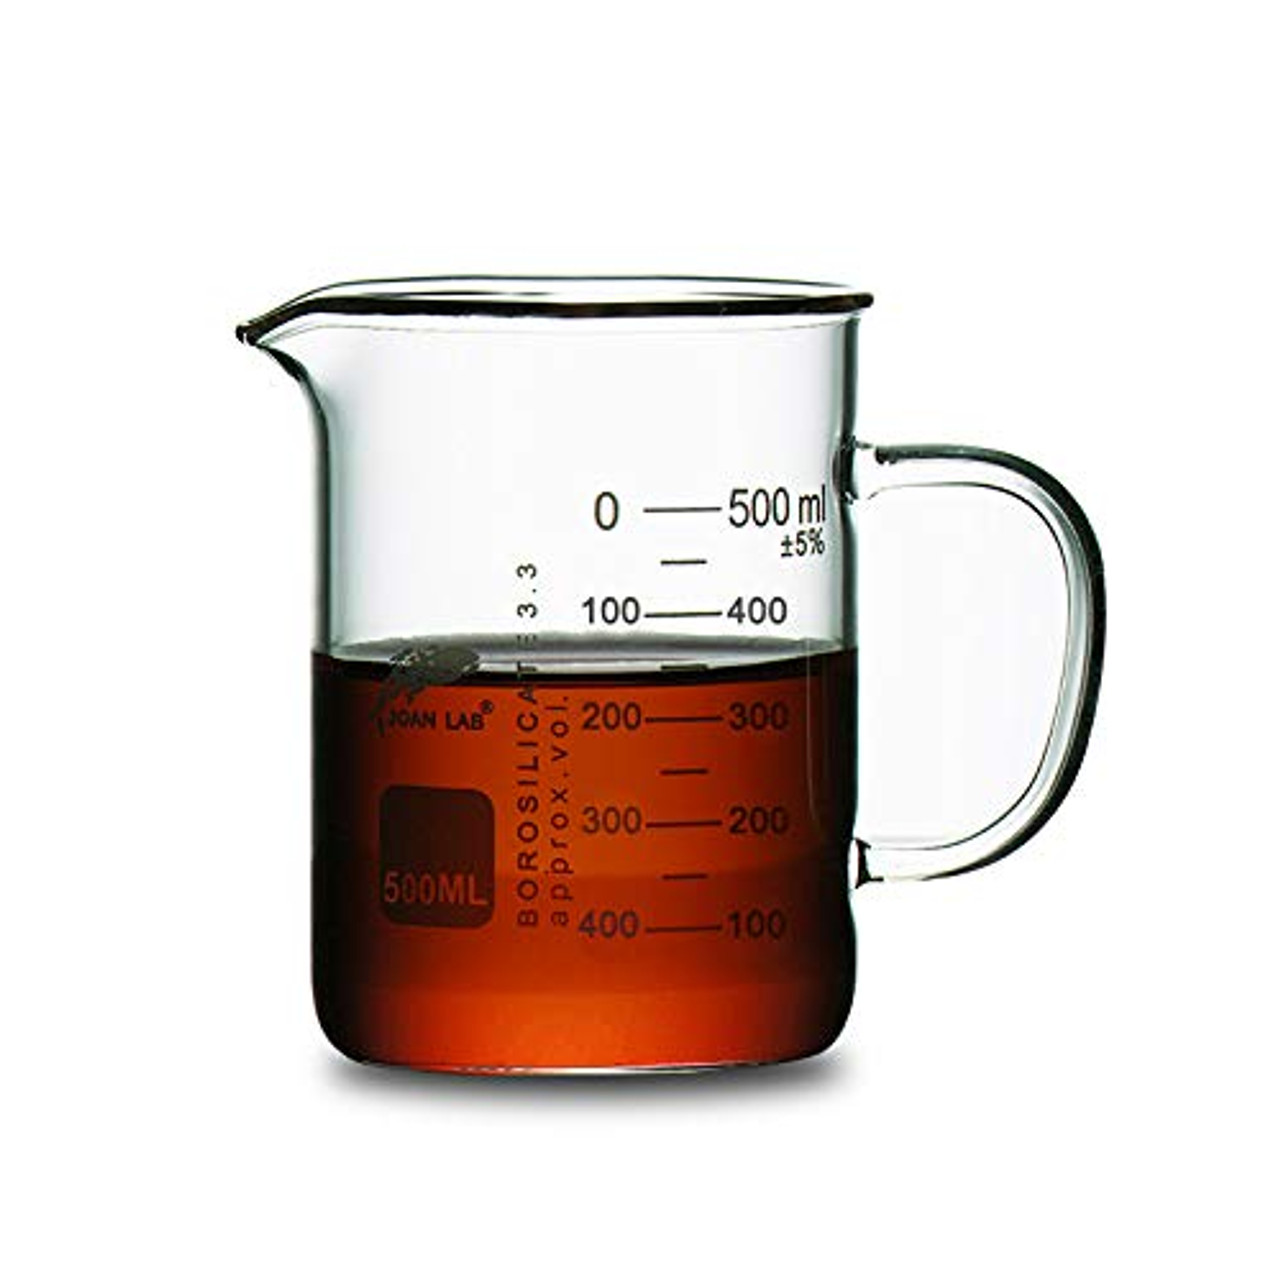  RUNROTOO Pouring Pitcher Laboratory Beaker Mug Stainless Steel  Pitcher with Handle Scale Cup Measuring Pitcher with Spout Spouts Measuring  Triple Pitcher Cooking Beaker Coffee Milk : Home & Kitchen